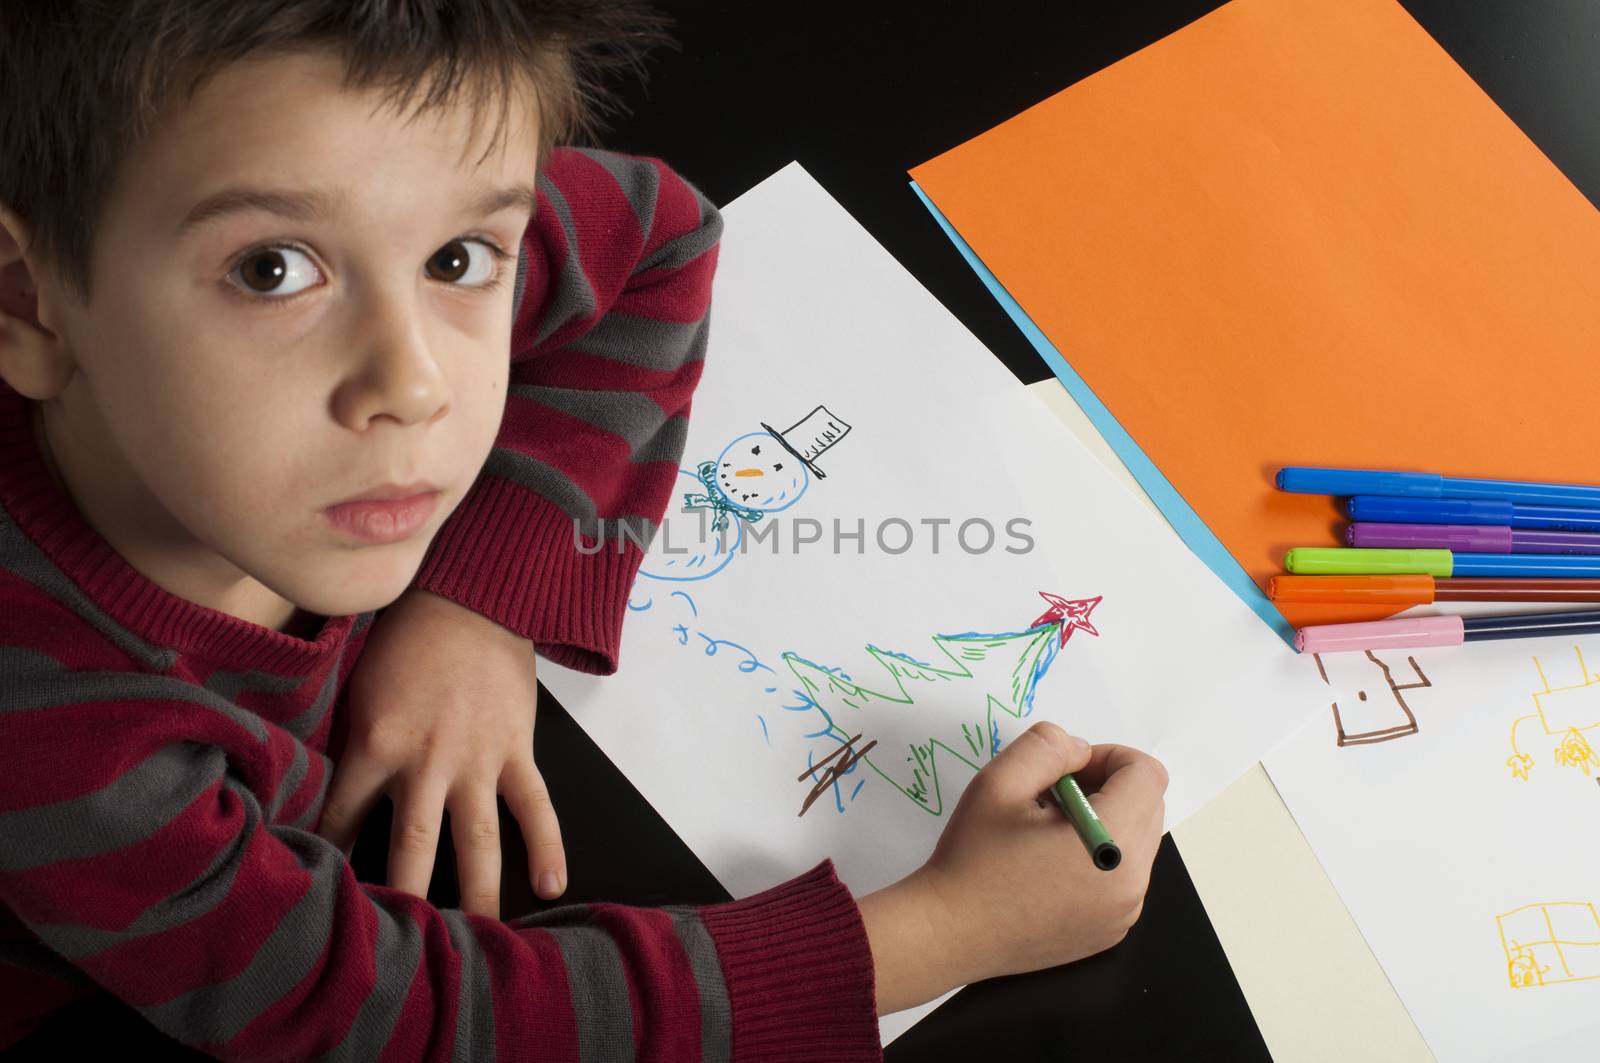 Boy drawing with markers. Multicolored papers